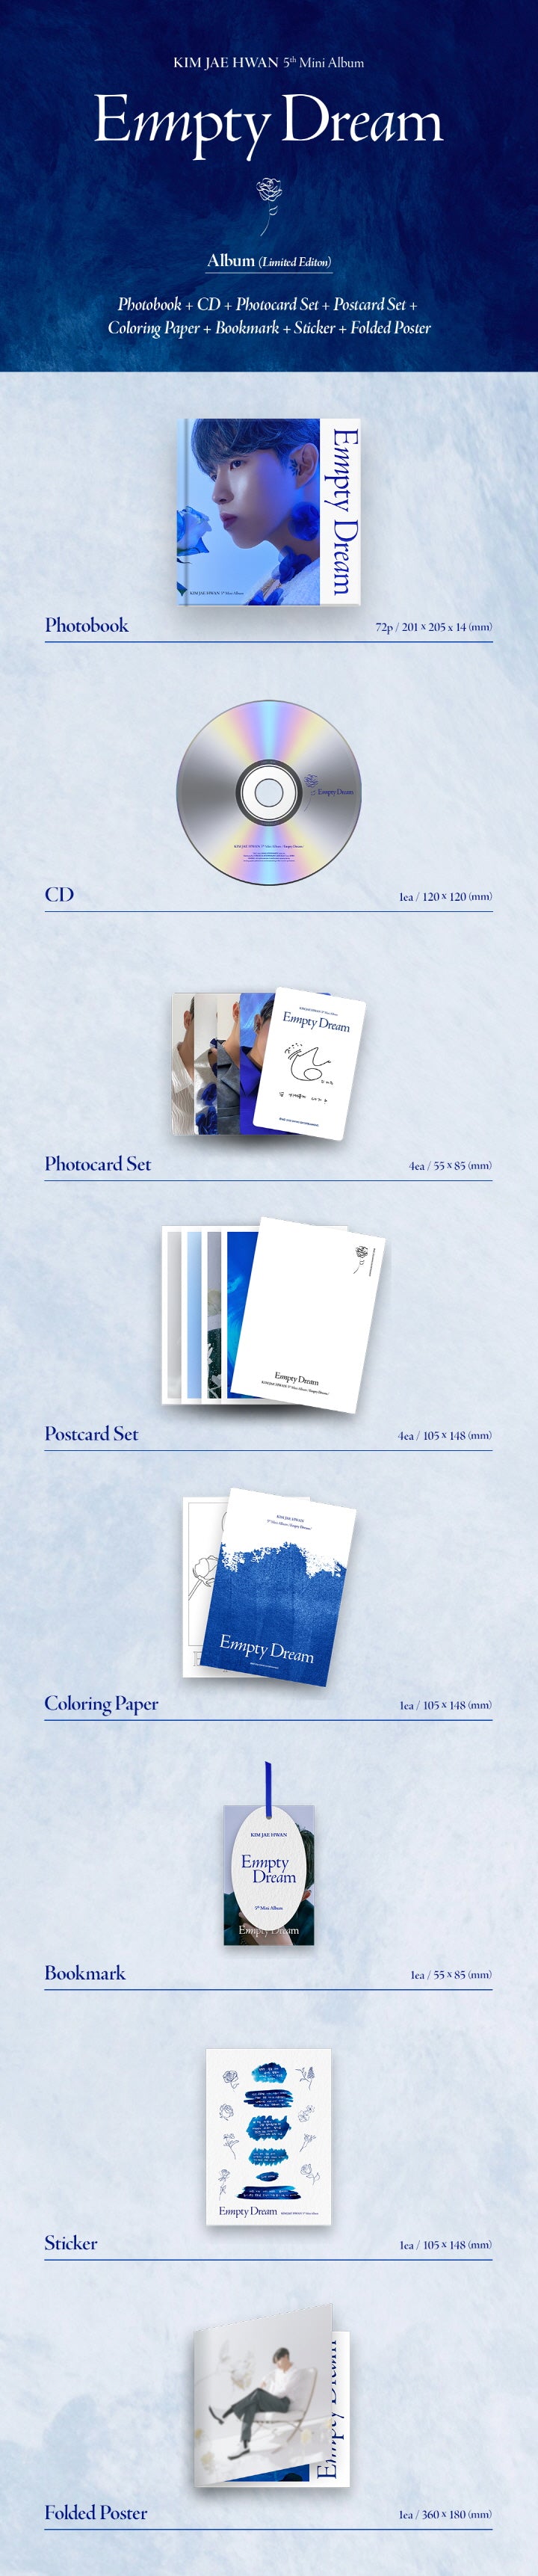 1 CD
1 Photo Book (72 pages)
4 Photo Cards
4 Postcards
1 Coloring Paper
1 Bookmark
1 Sticker
1 Folded Poster